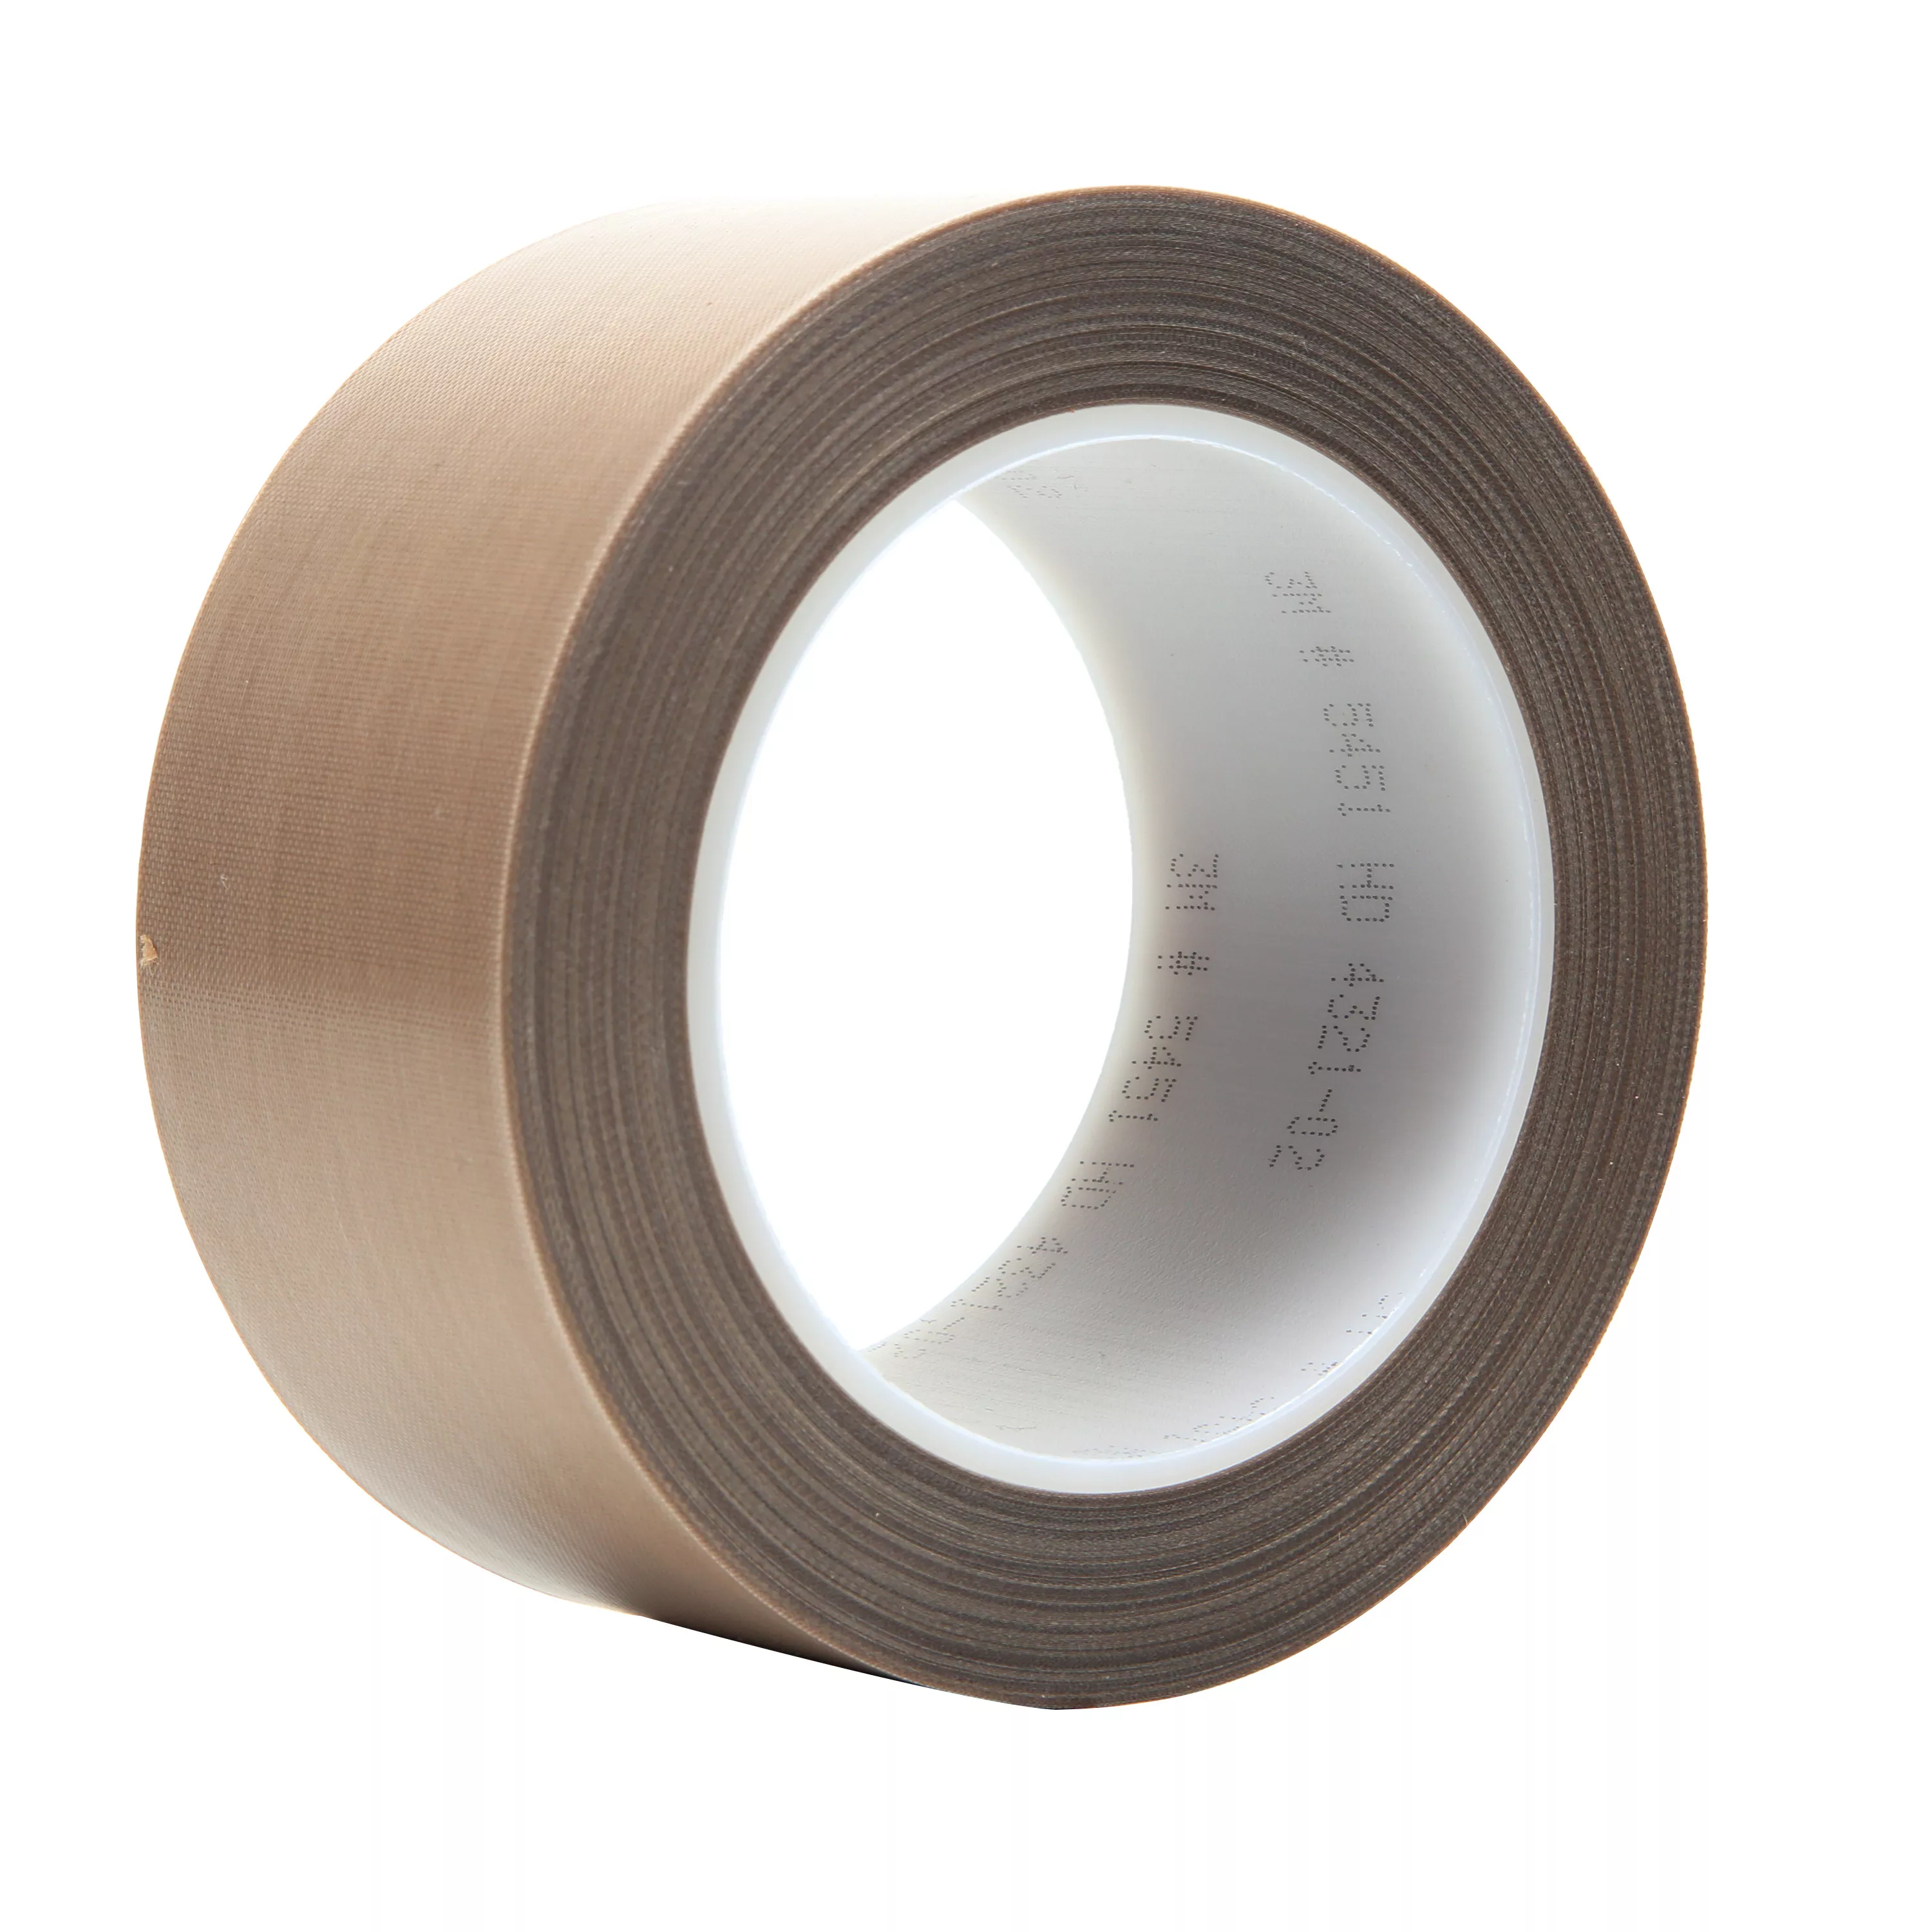 3M™ PTFE Glass Cloth Tape 5451, Brown, 2 in x 36 yd, 5.6 mil, 6
Roll/Case